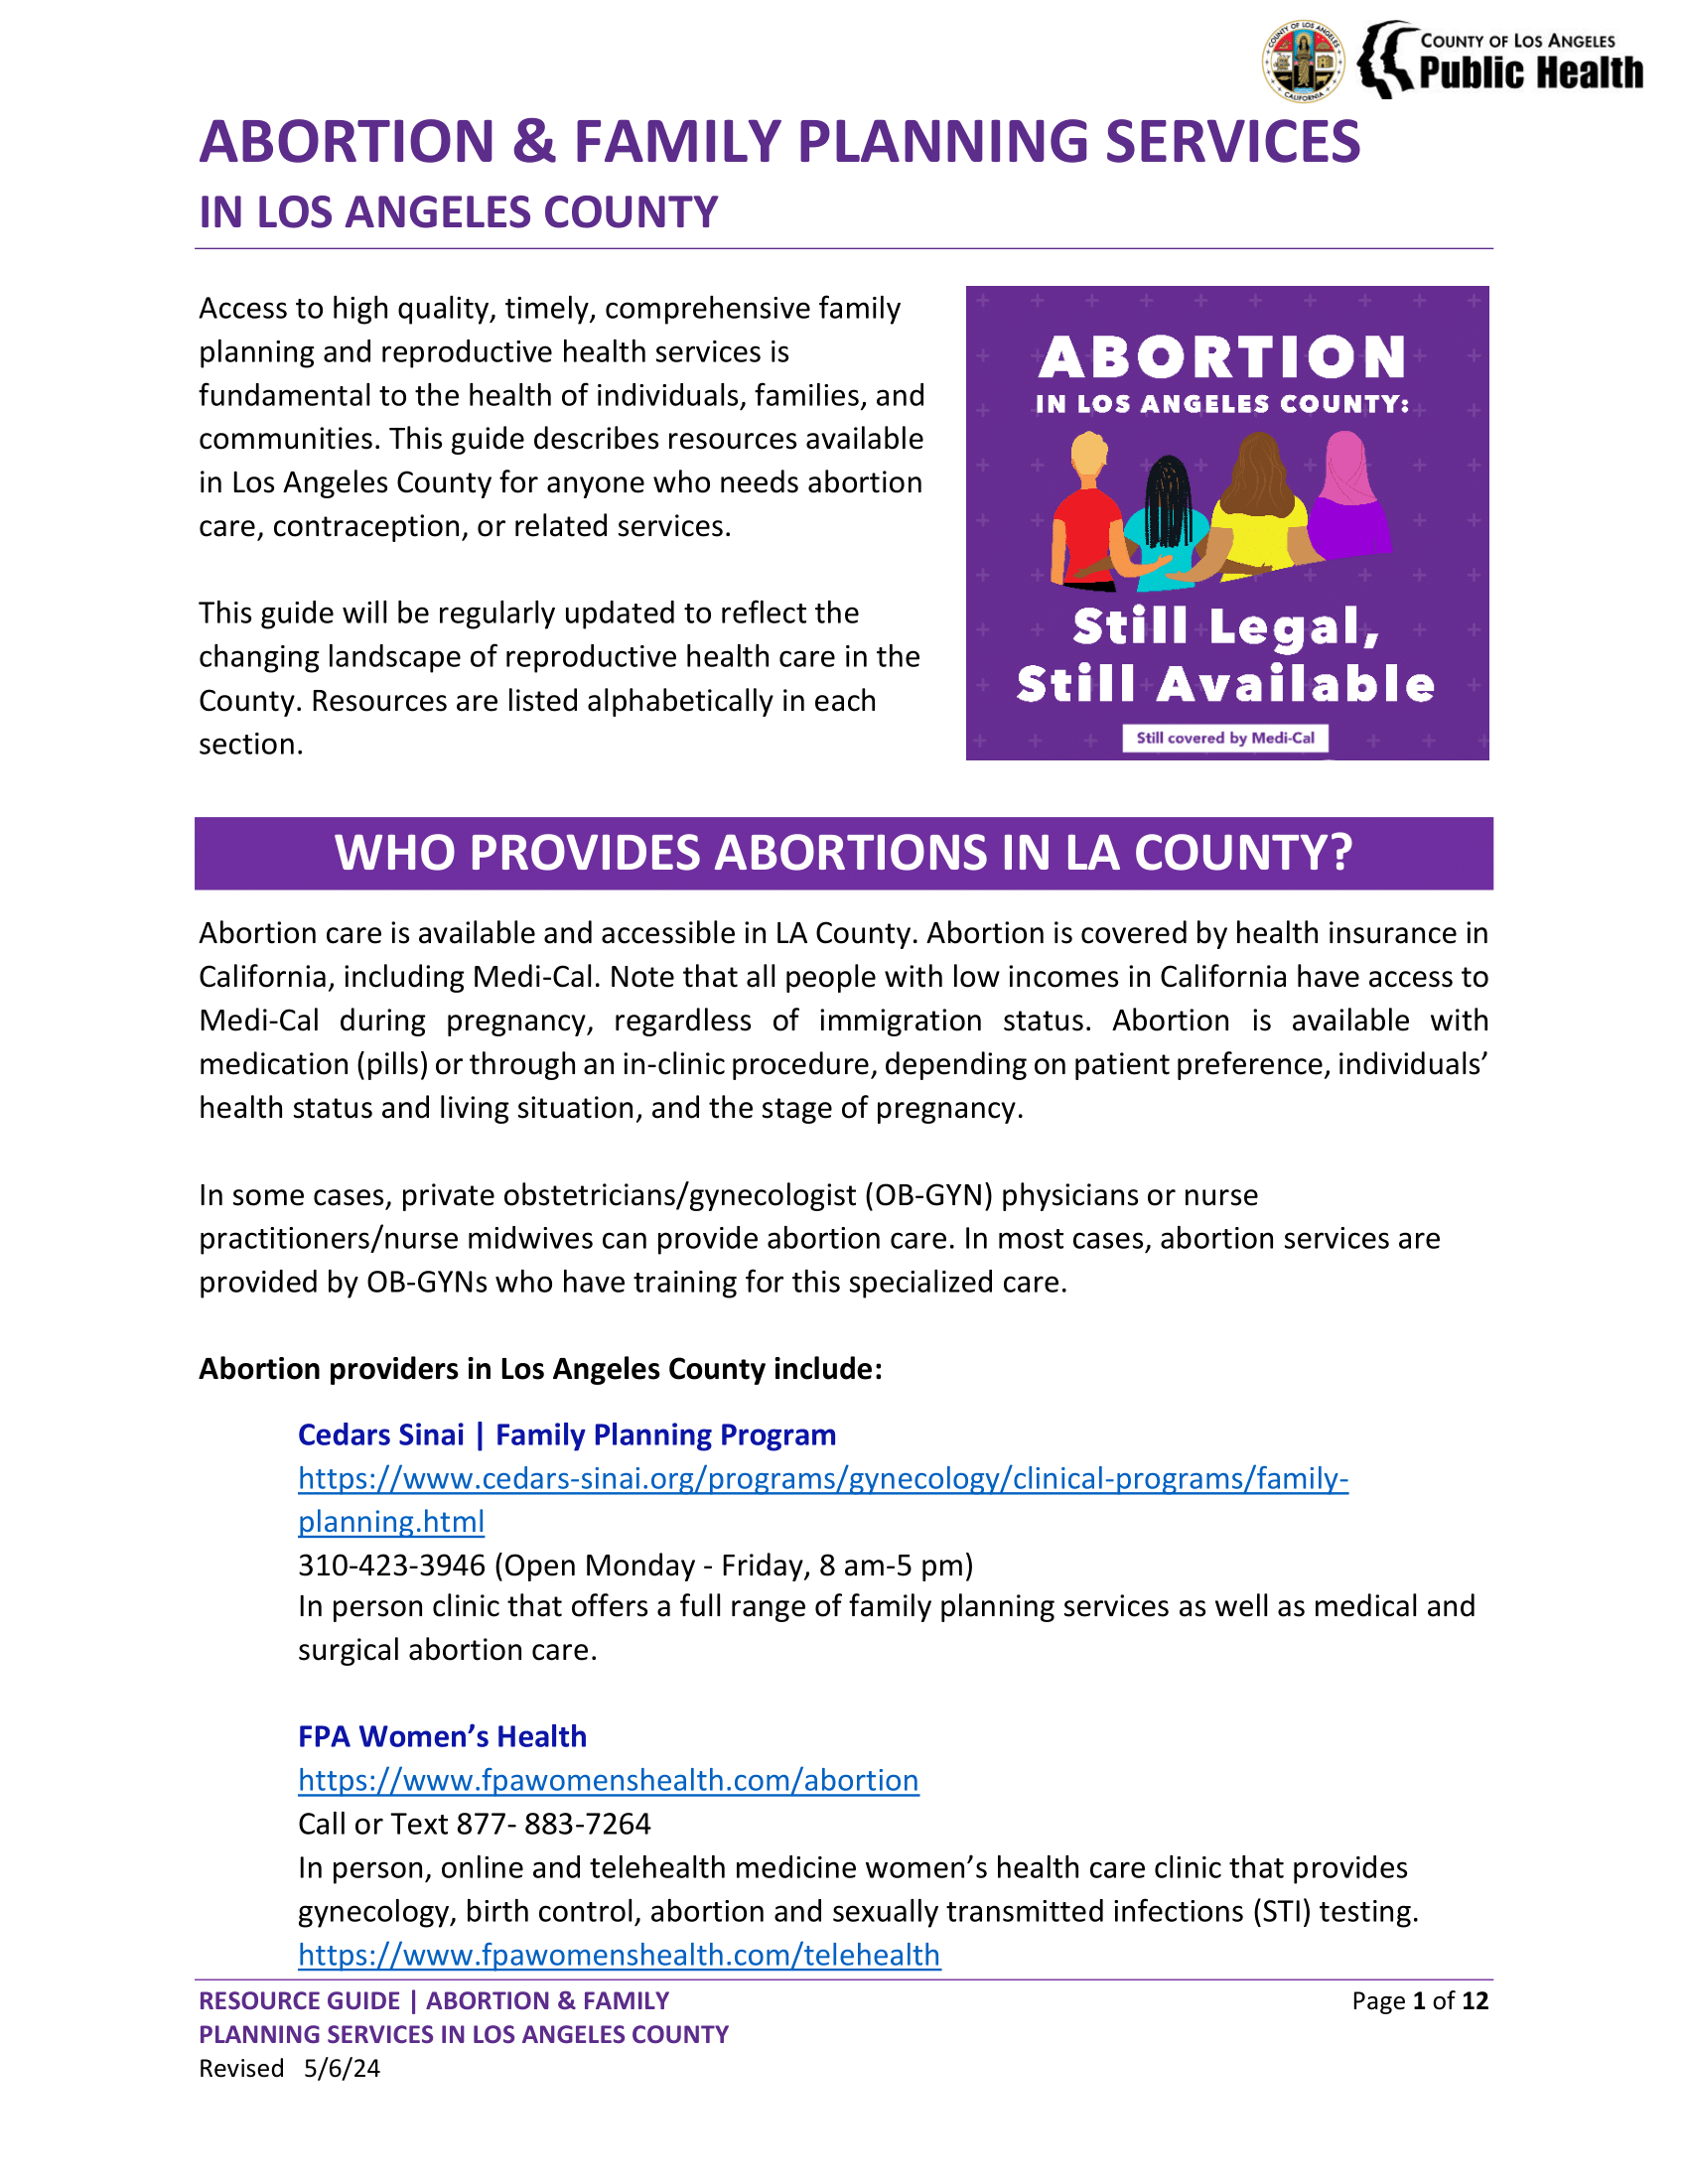 Abortion Resource Guide